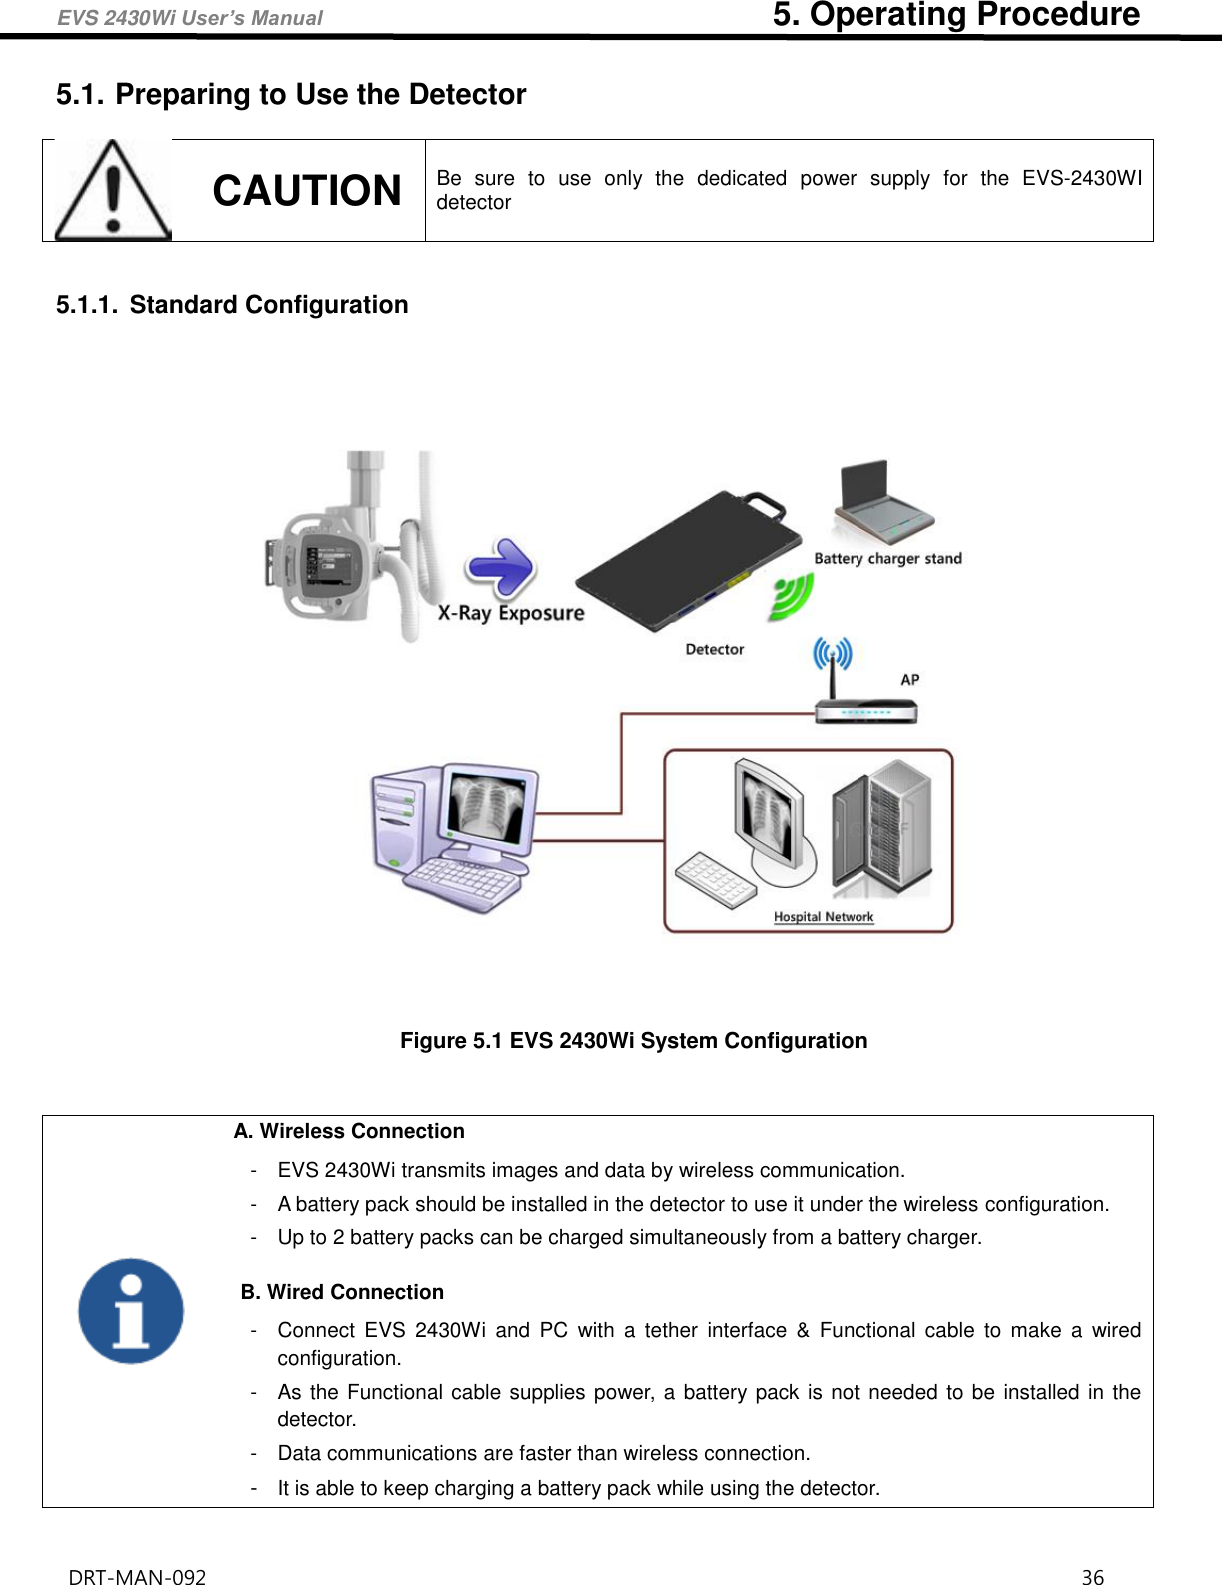 EVS 2430Wi User’s Manual                                                      5. Operating Procedure DRT-MAN-092                                                                                    36   5.1. Preparing to Use the Detector  CAUTION Be  sure  to  use  only  the  dedicated  power  supply  for  the  EVS-2430WI detector   5.1.1.  Standard Configuration      Figure 5.1 EVS 2430Wi System Configuration    A. Wireless Connection -  EVS 2430Wi transmits images and data by wireless communication.   -  A battery pack should be installed in the detector to use it under the wireless configuration.   -  Up to 2 battery packs can be charged simultaneously from a battery charger.    B. Wired Connection -  Connect  EVS  2430Wi  and  PC  with  a  tether  interface  &amp;  Functional  cable  to  make  a  wired configuration.   -  As the Functional cable supplies power, a battery pack is not needed to be installed in the detector. -  Data communications are faster than wireless connection.   -  It is able to keep charging a battery pack while using the detector.     